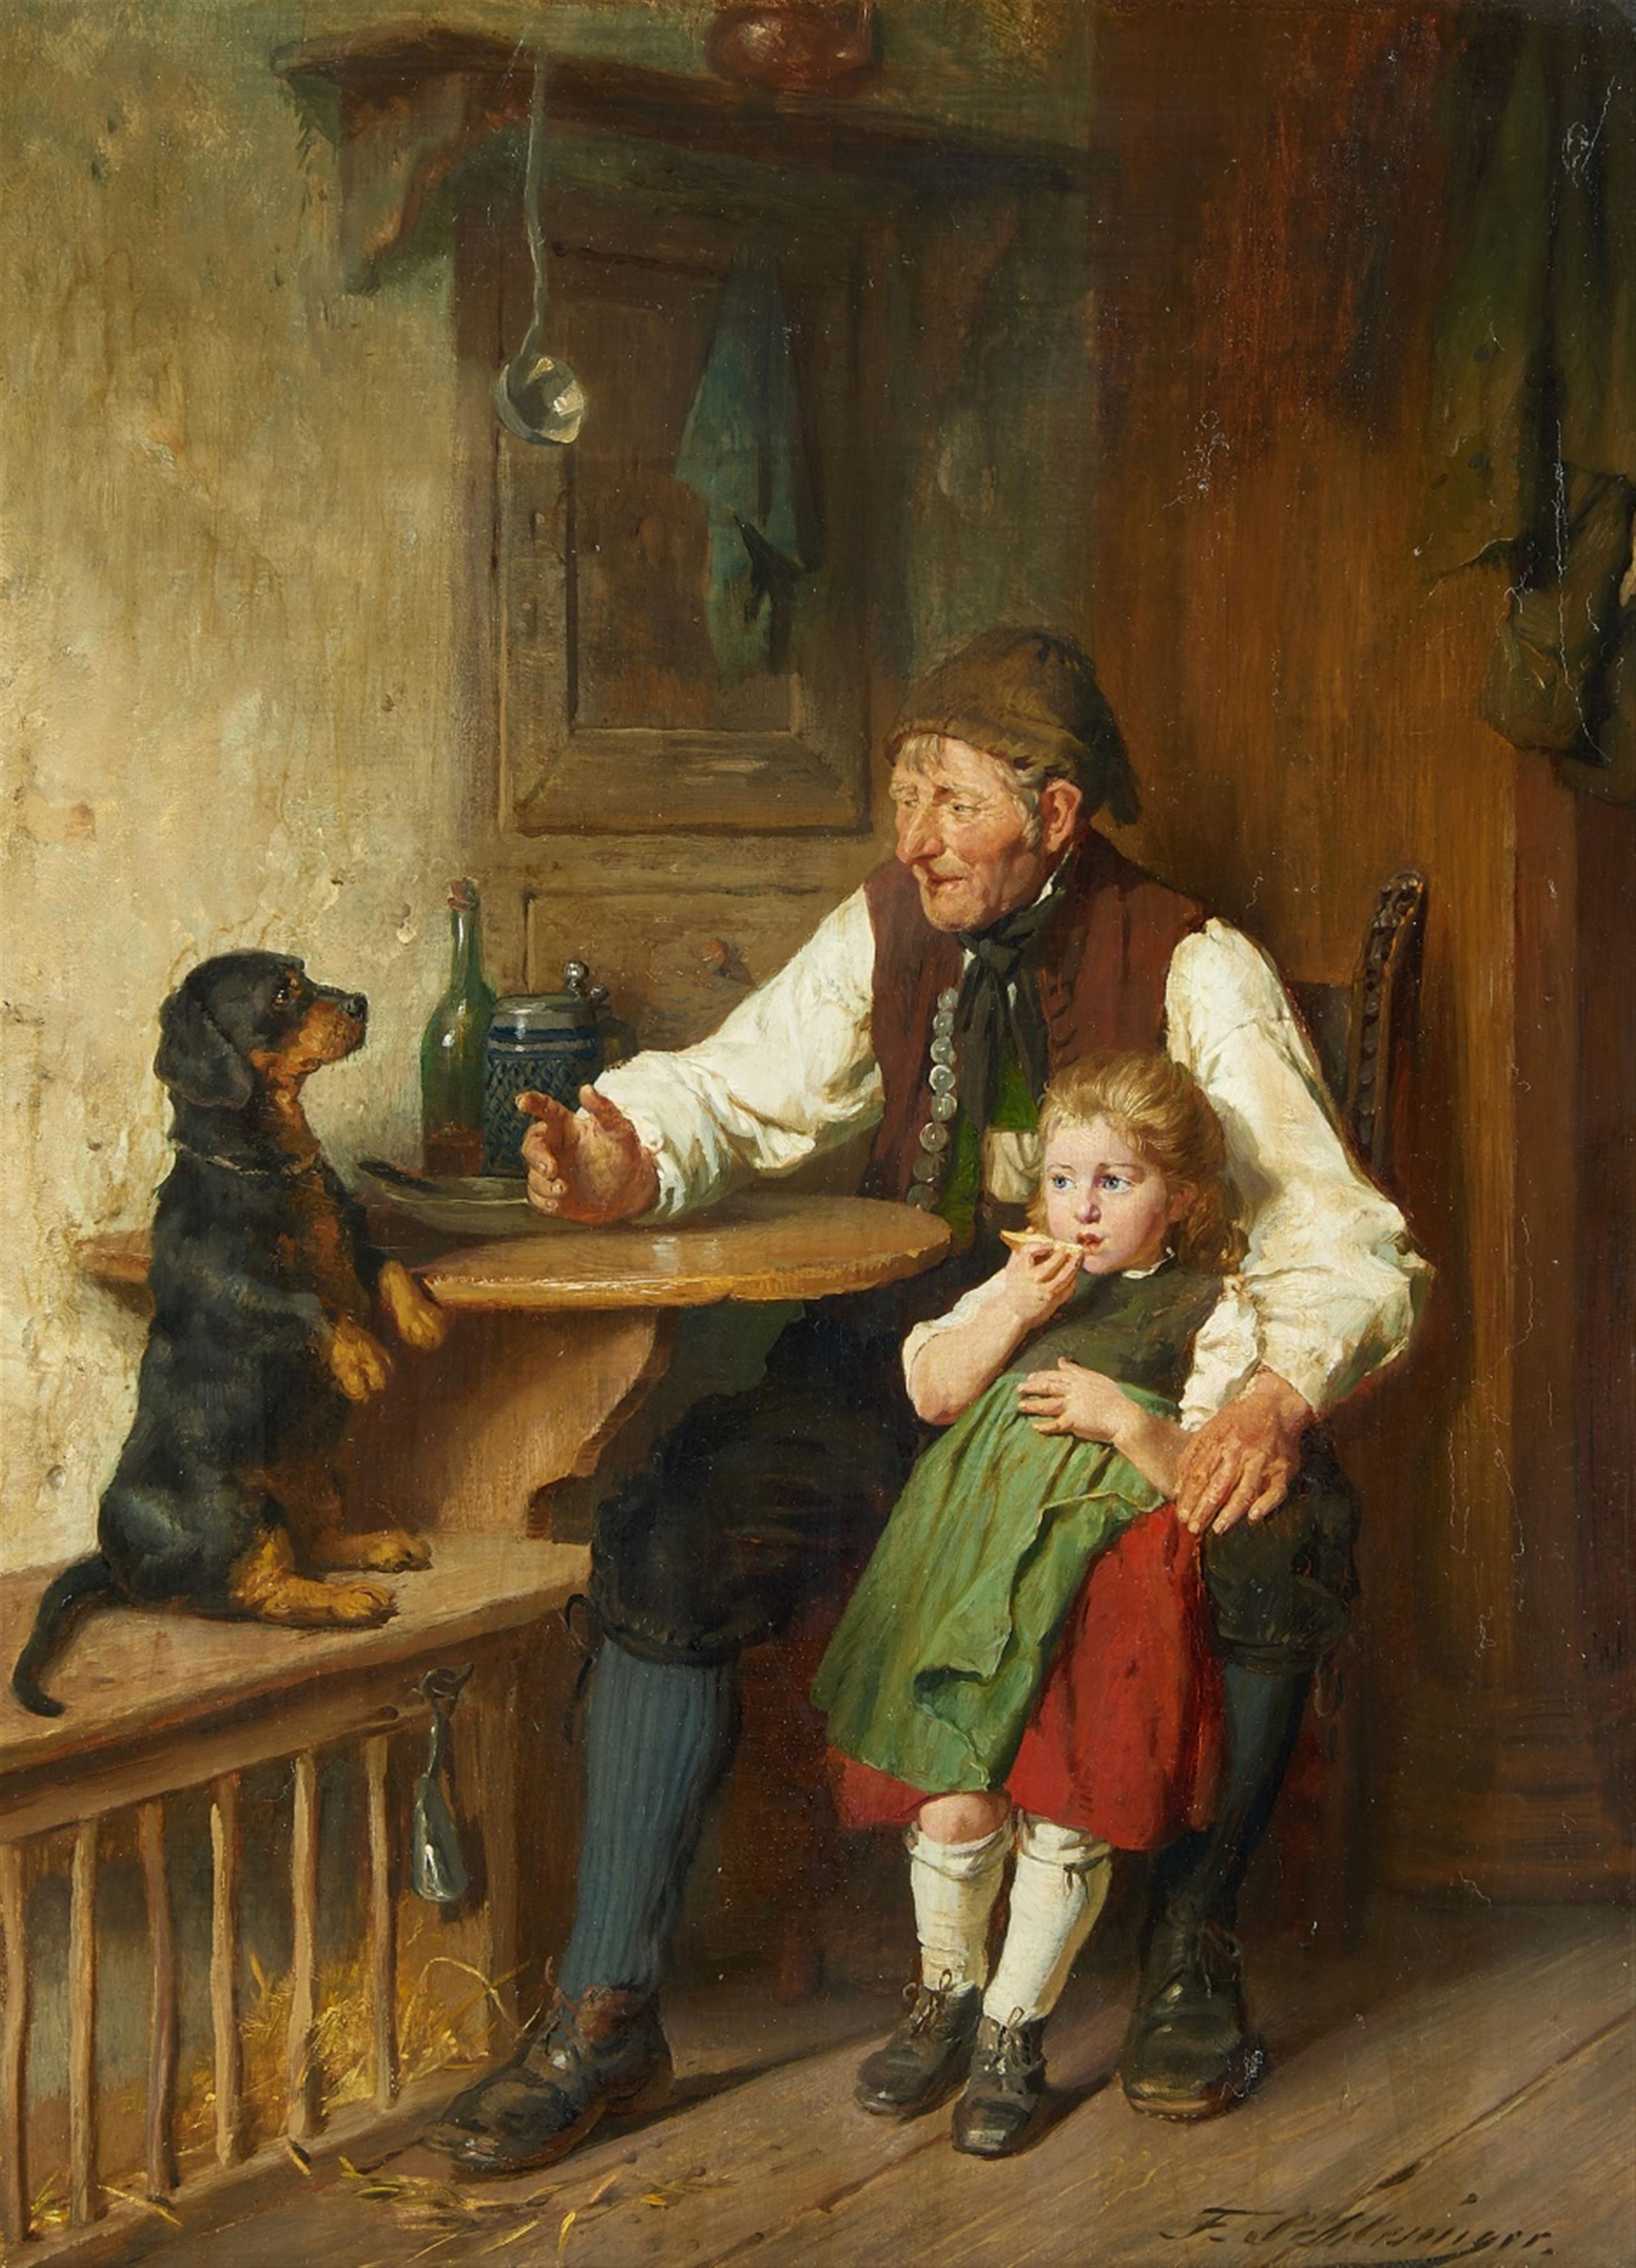 Felix Schlesinger - Rustic Interior with Grandfather, Granddaughter and Dog - image-1